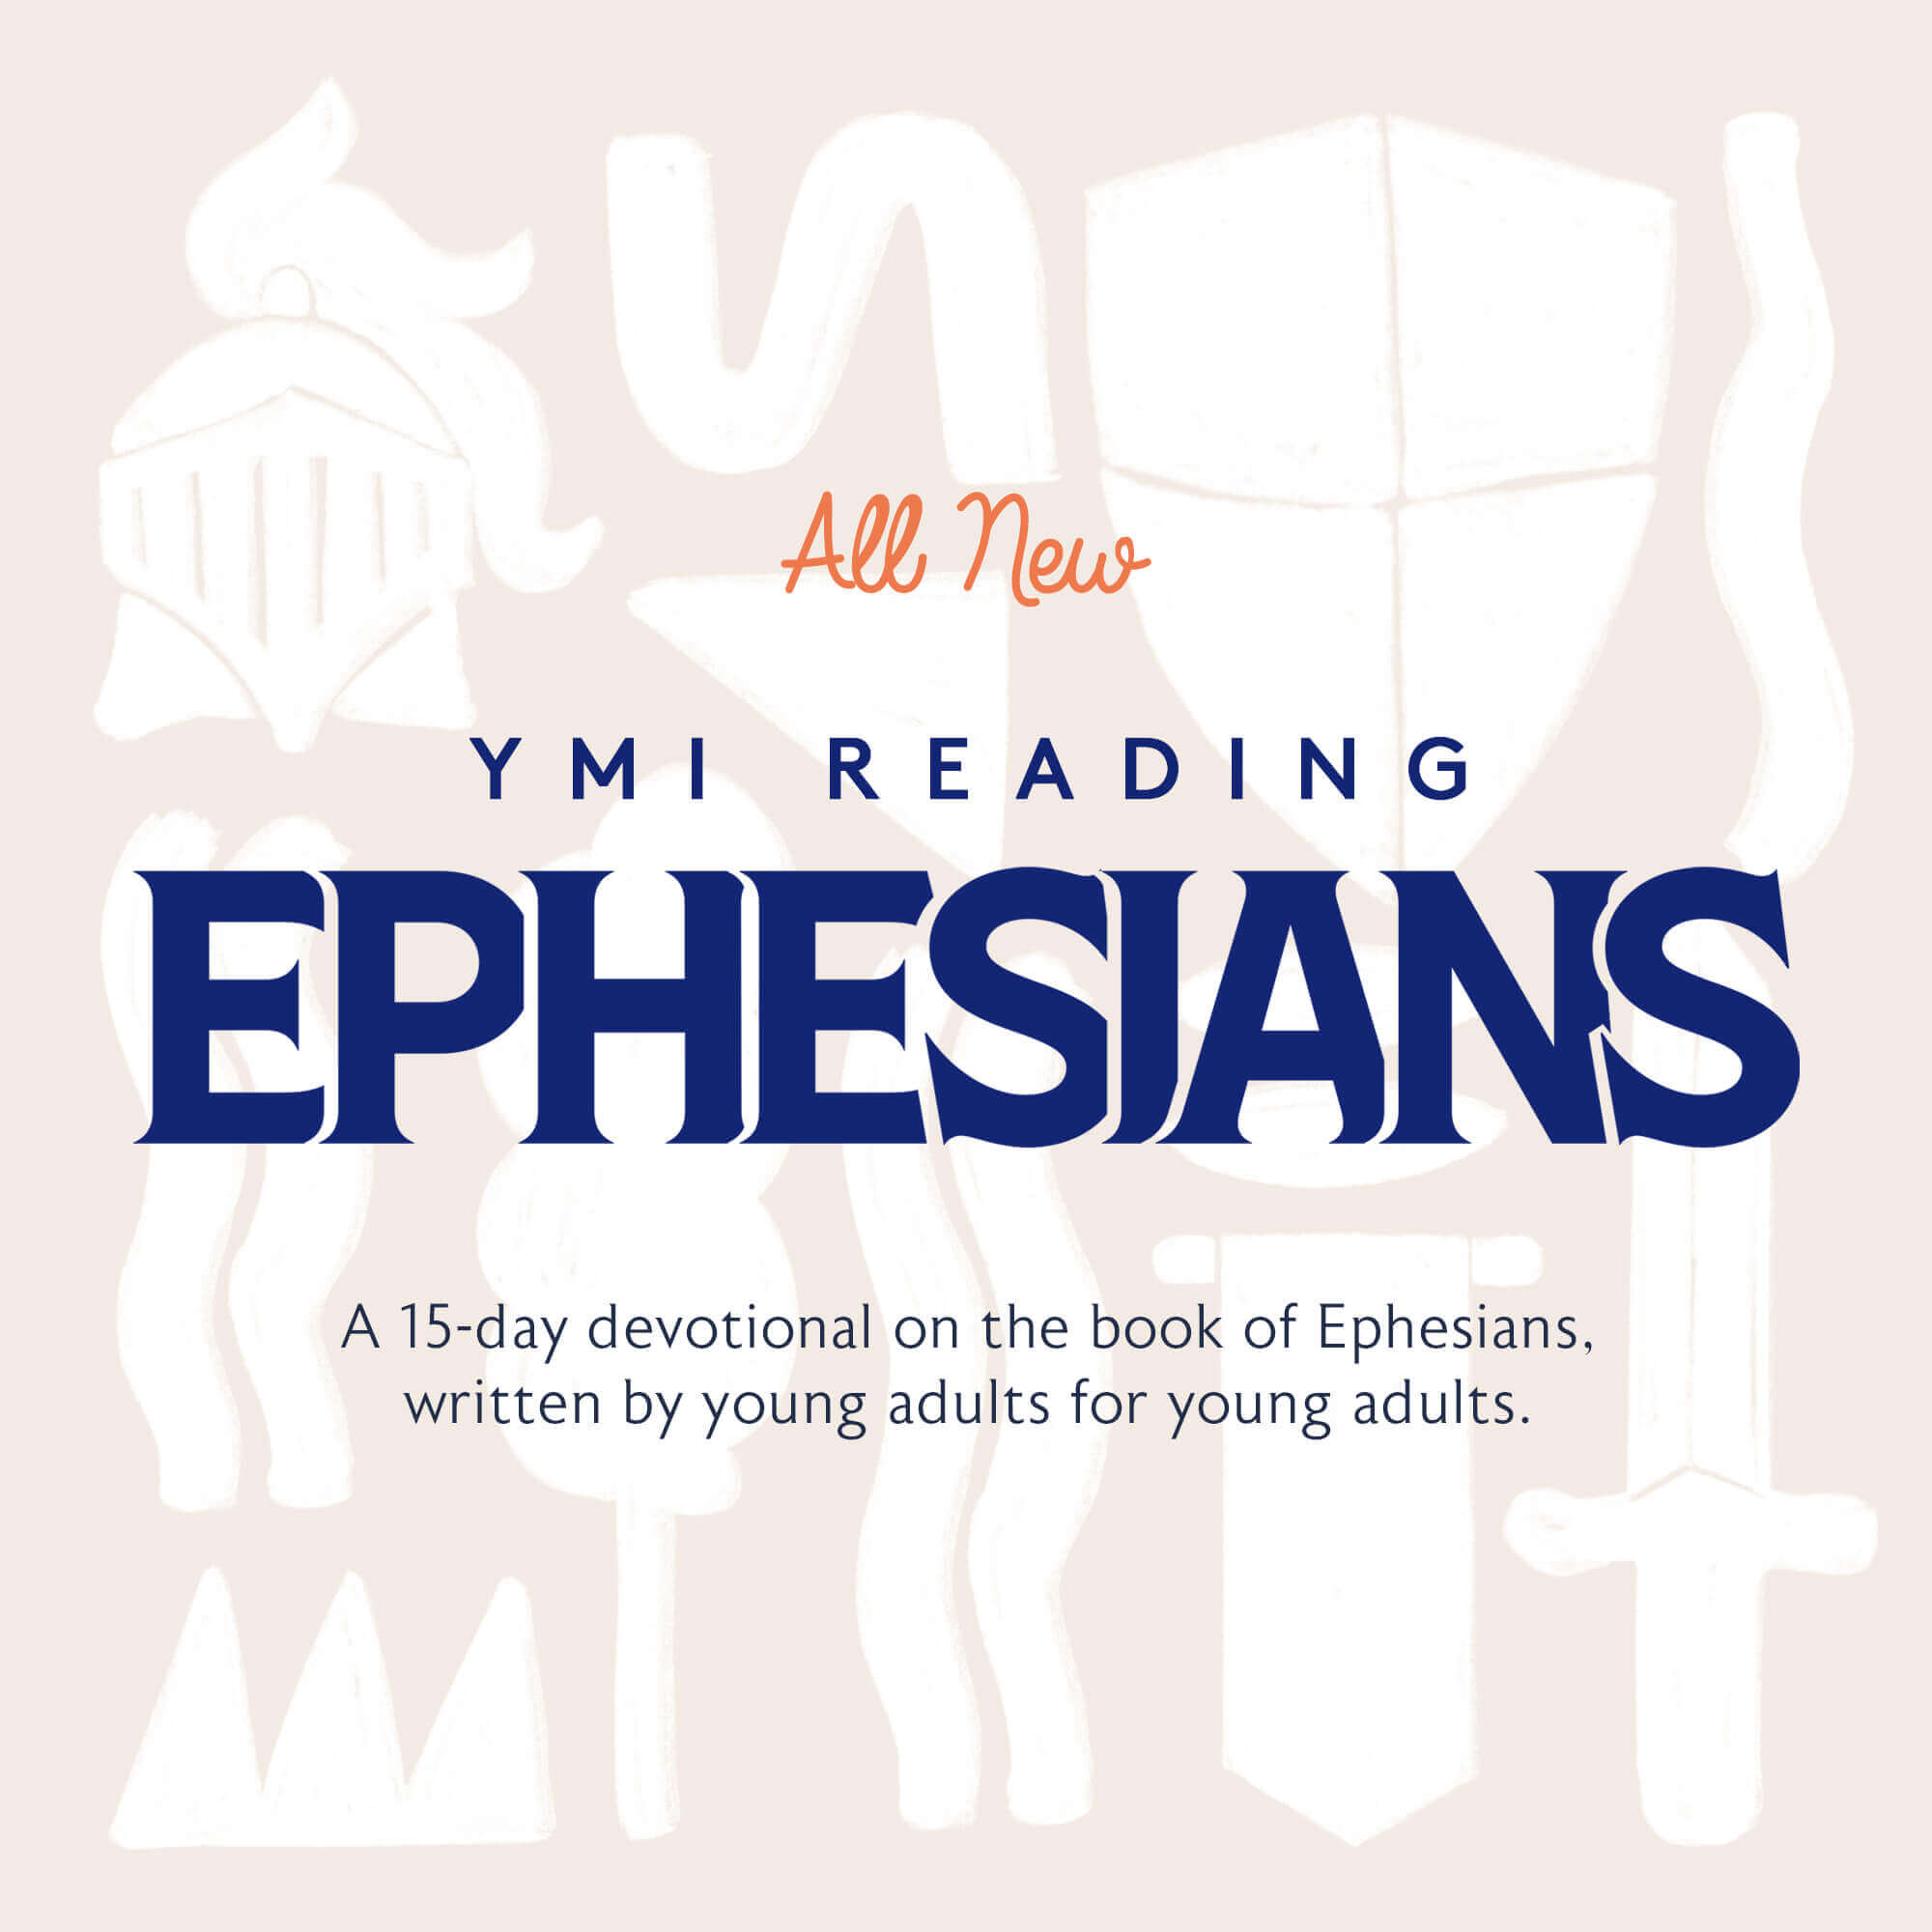 YMI Reading Ephesians. A 15-day devotional on the book of Ephesians, written by young adults for young adults.